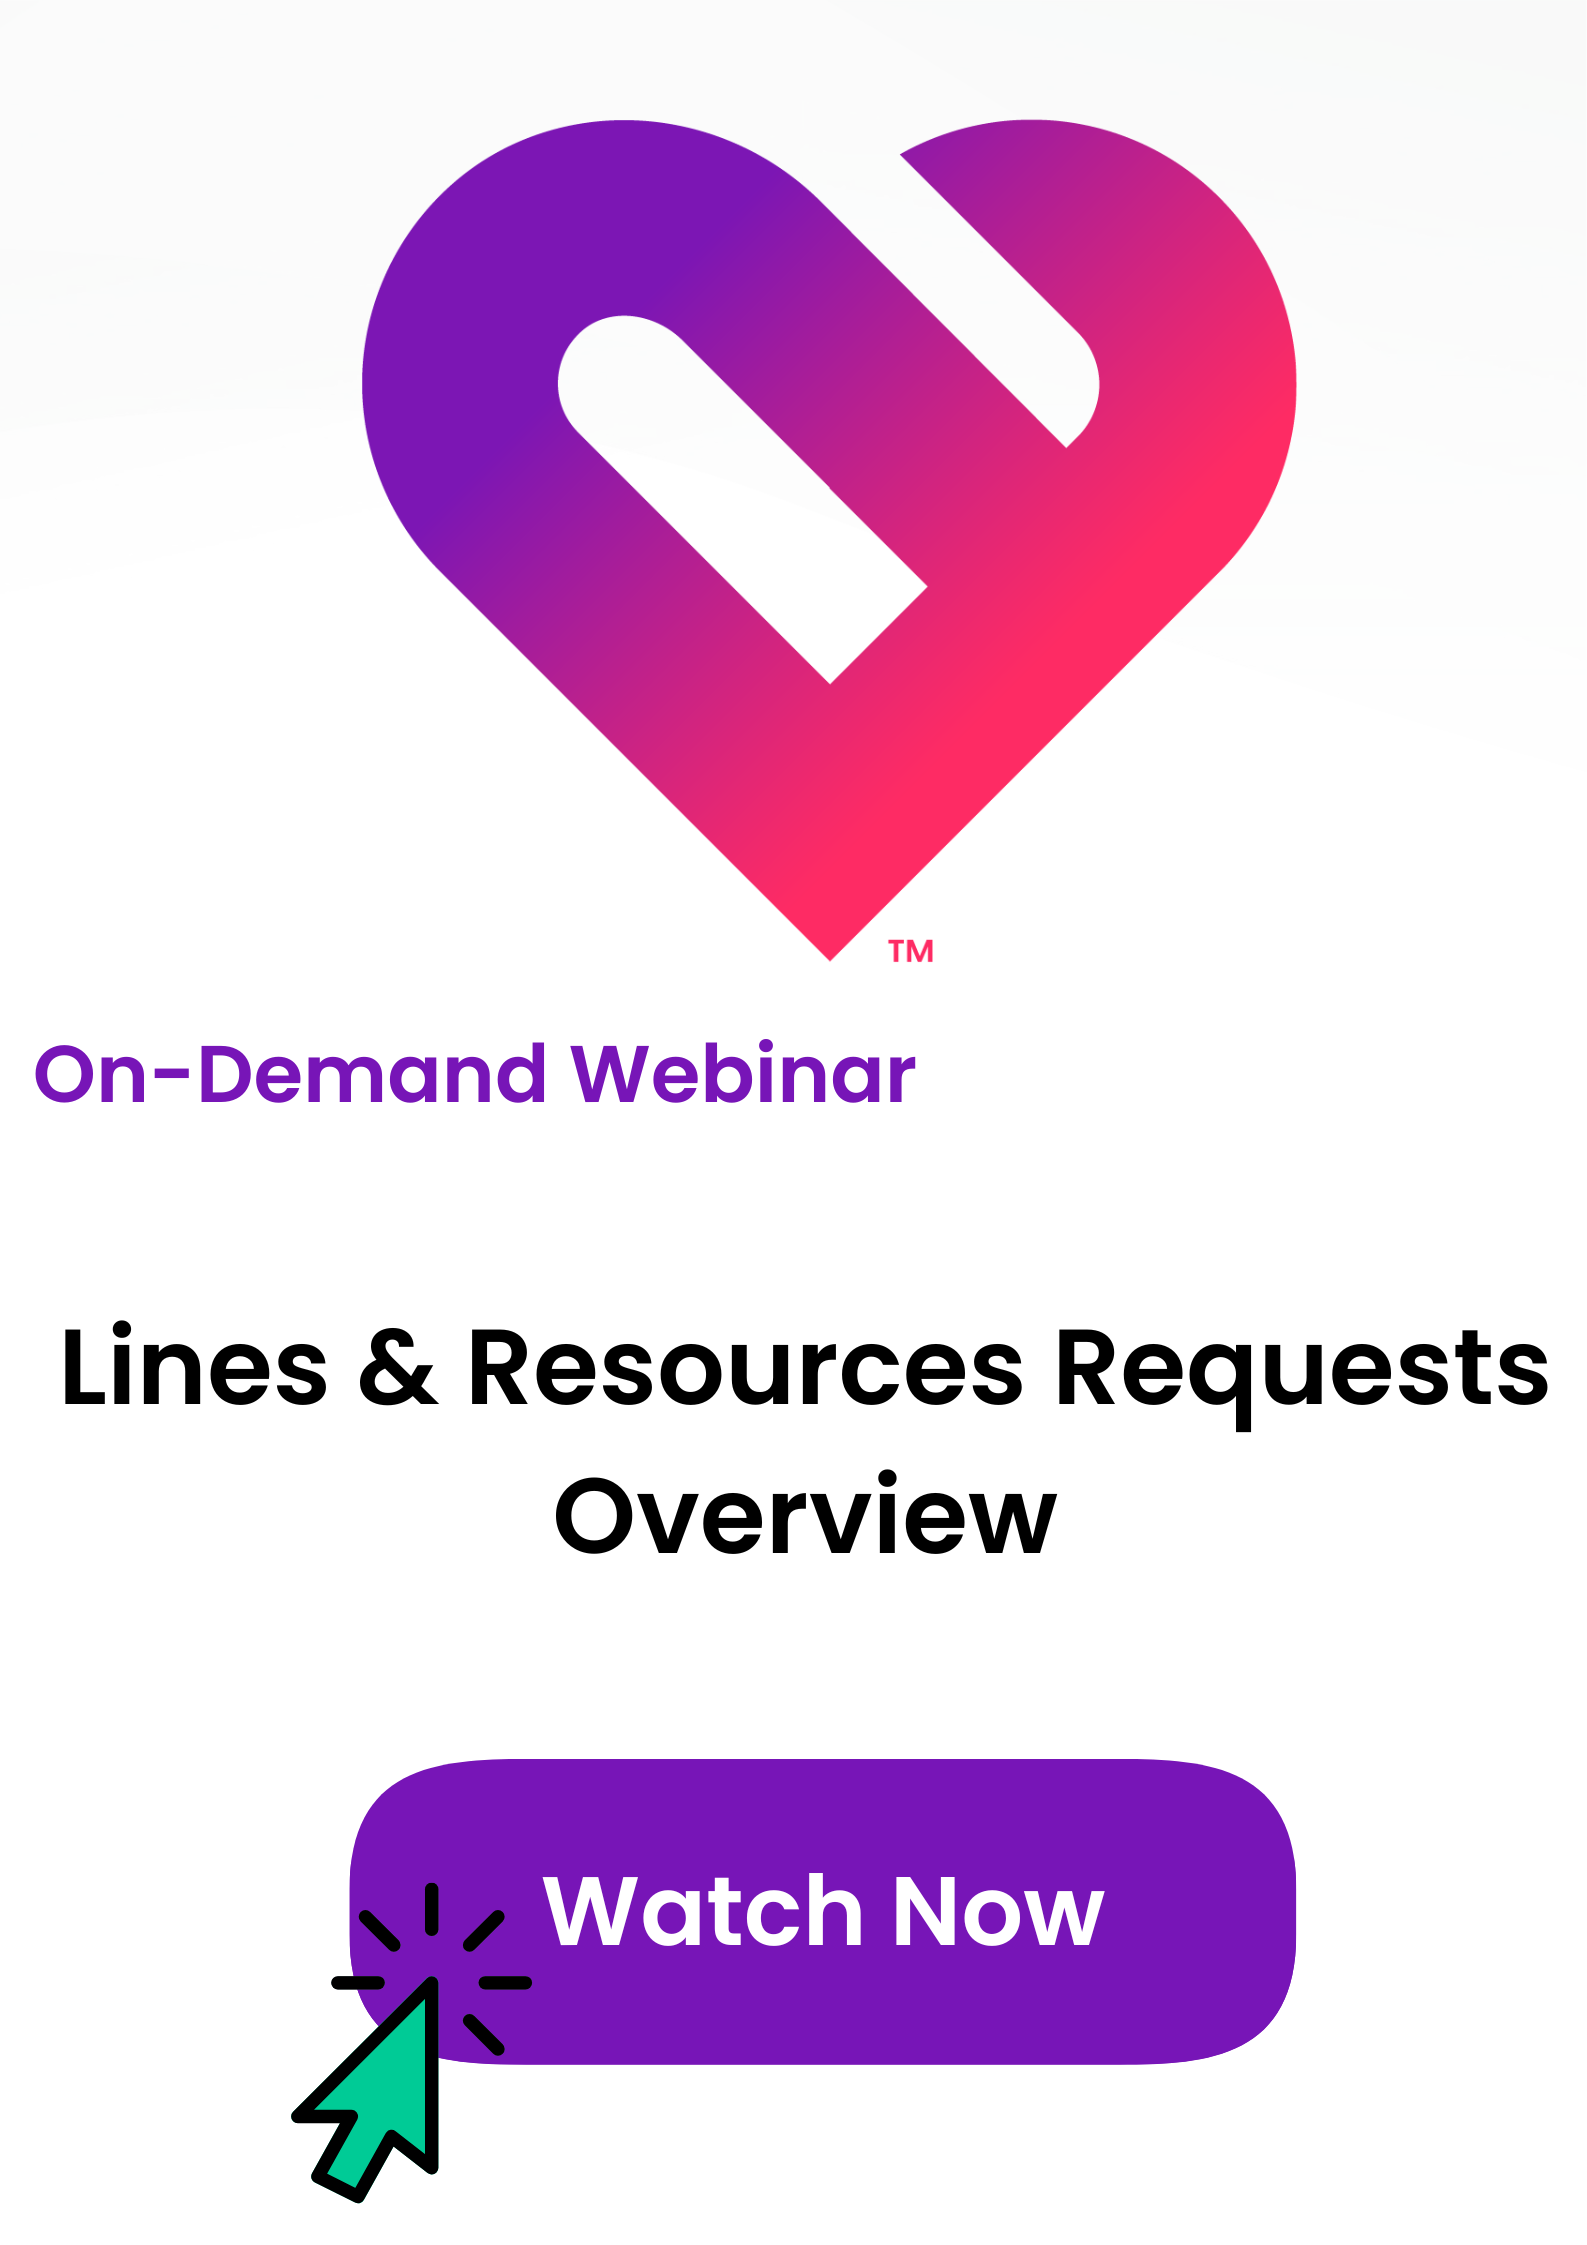 On-demand webinar tile for Lines and Resources Requests Overview, click to watch now